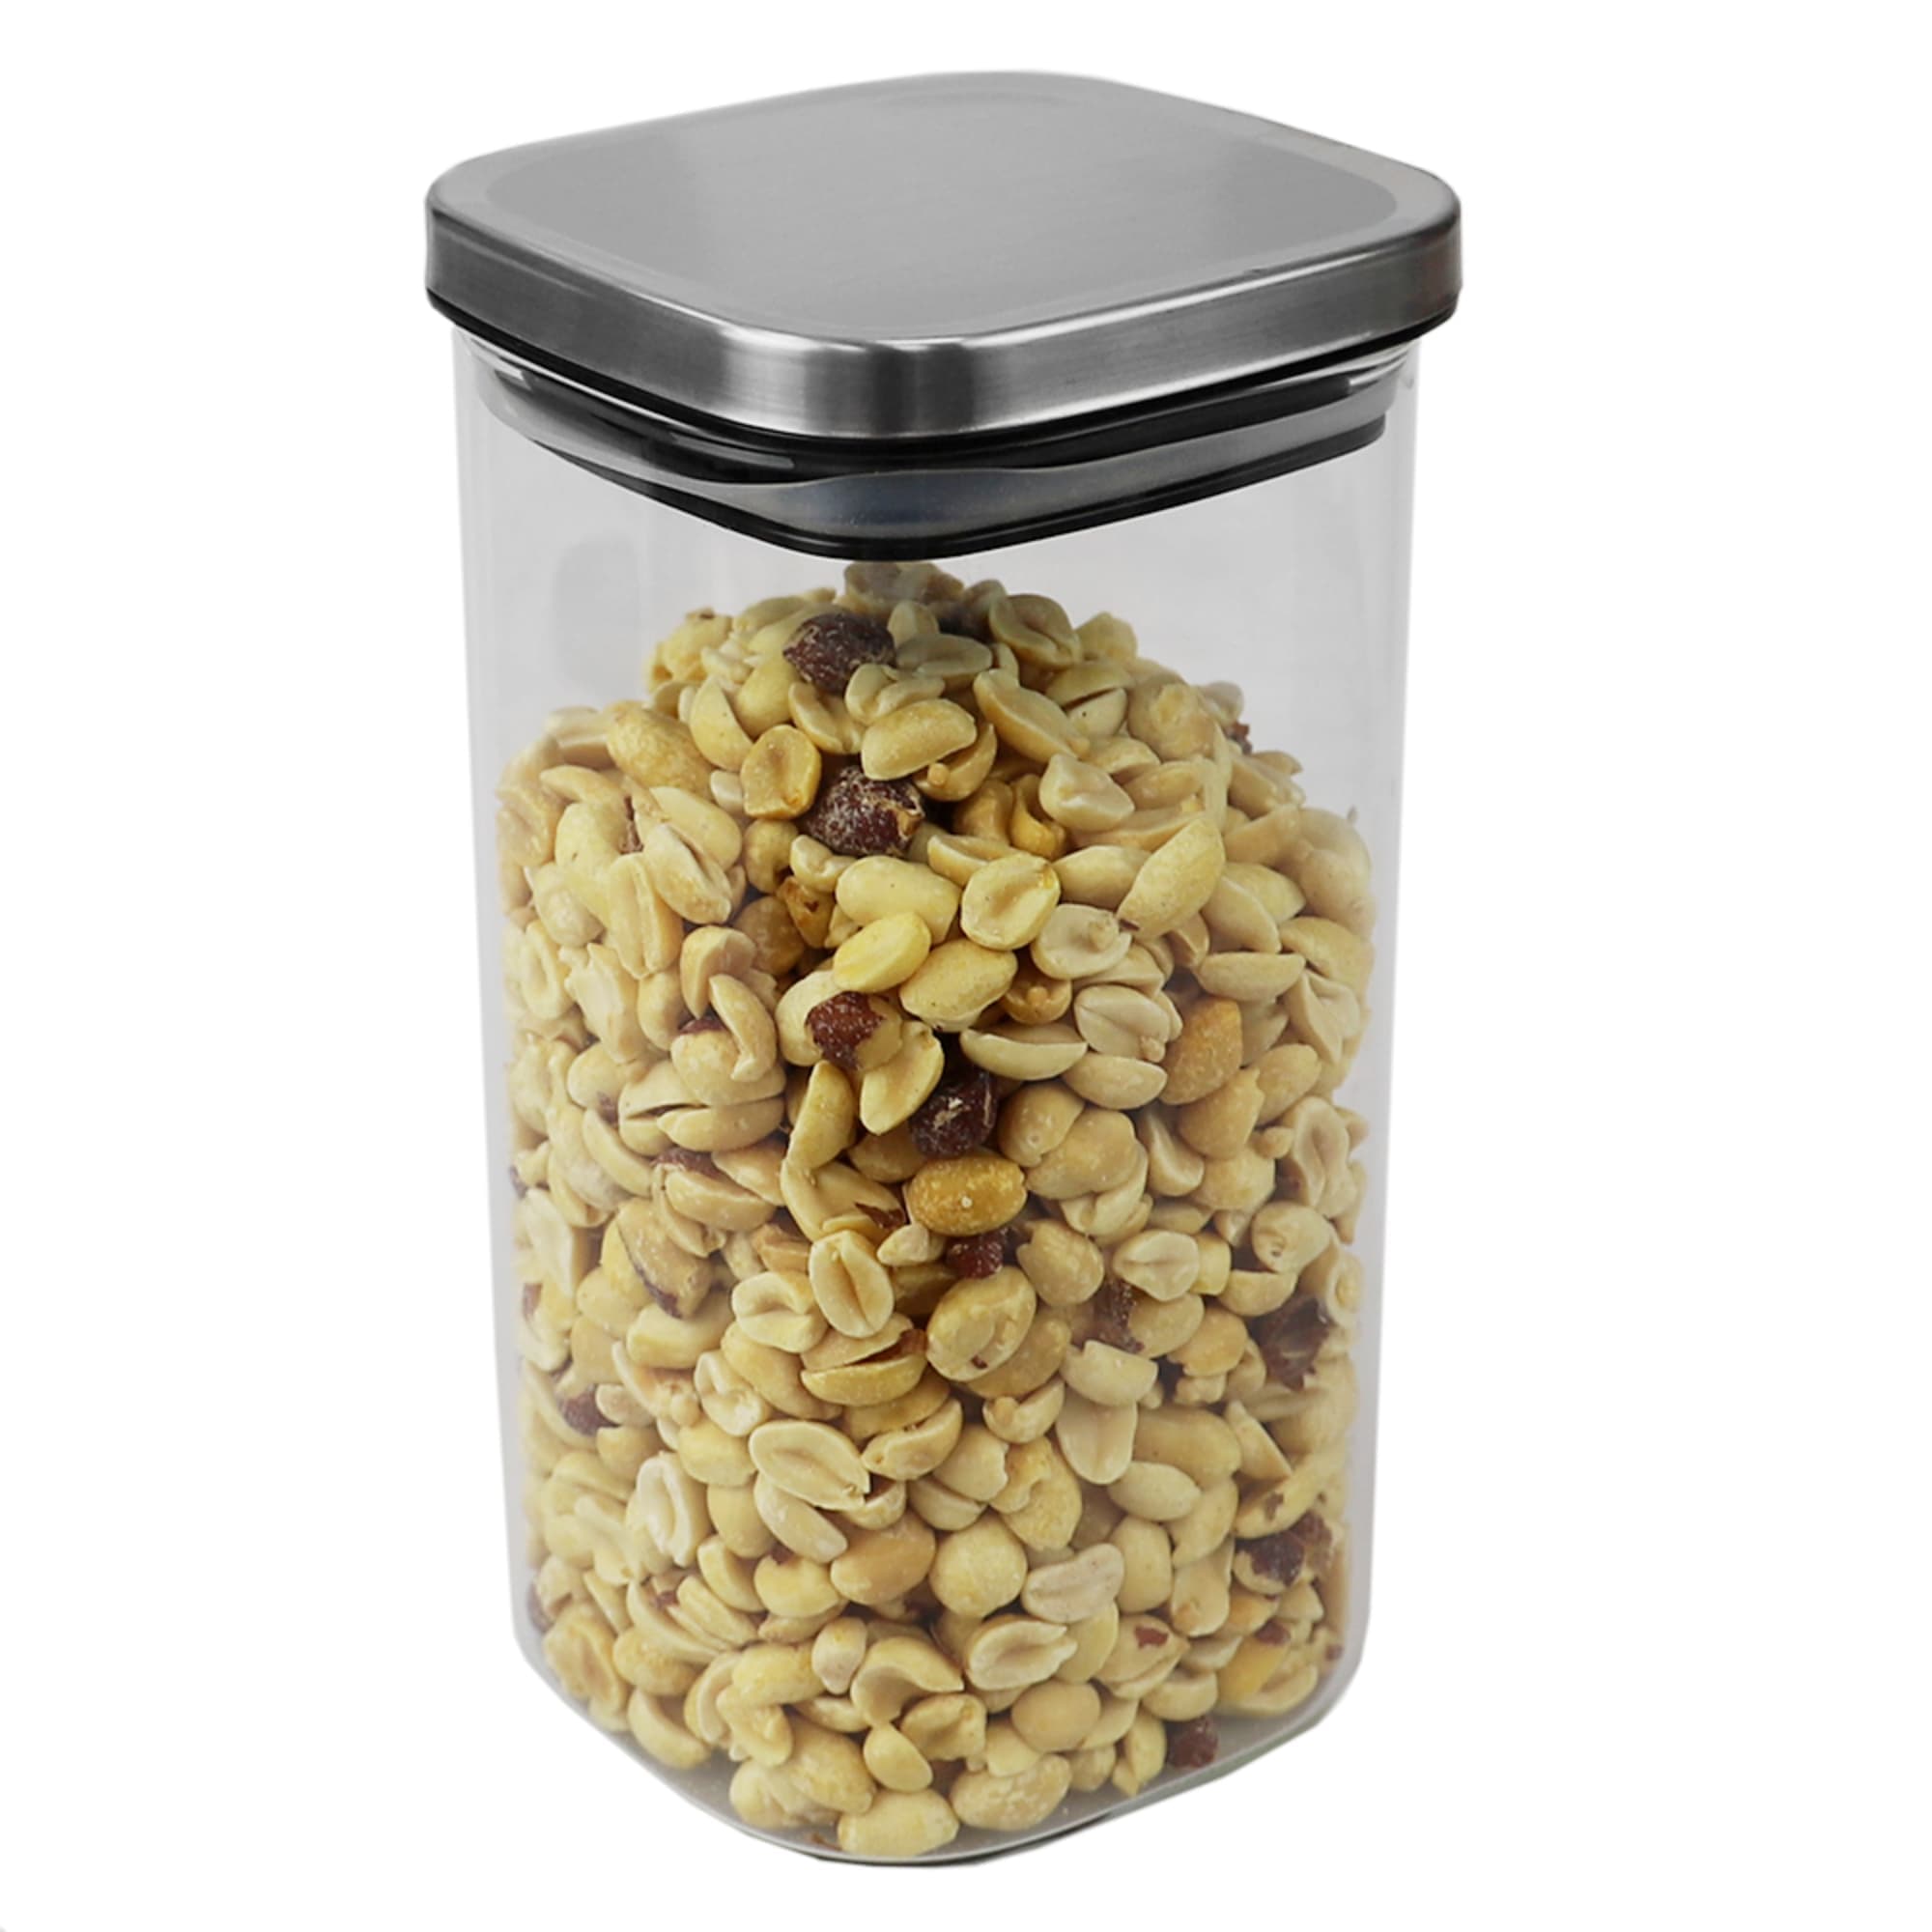 Michael Graves Design Large 47 Ounce Square Borosilicate Glass Canister with Stainless Steel Top $6.00 EACH, CASE PACK OF 12